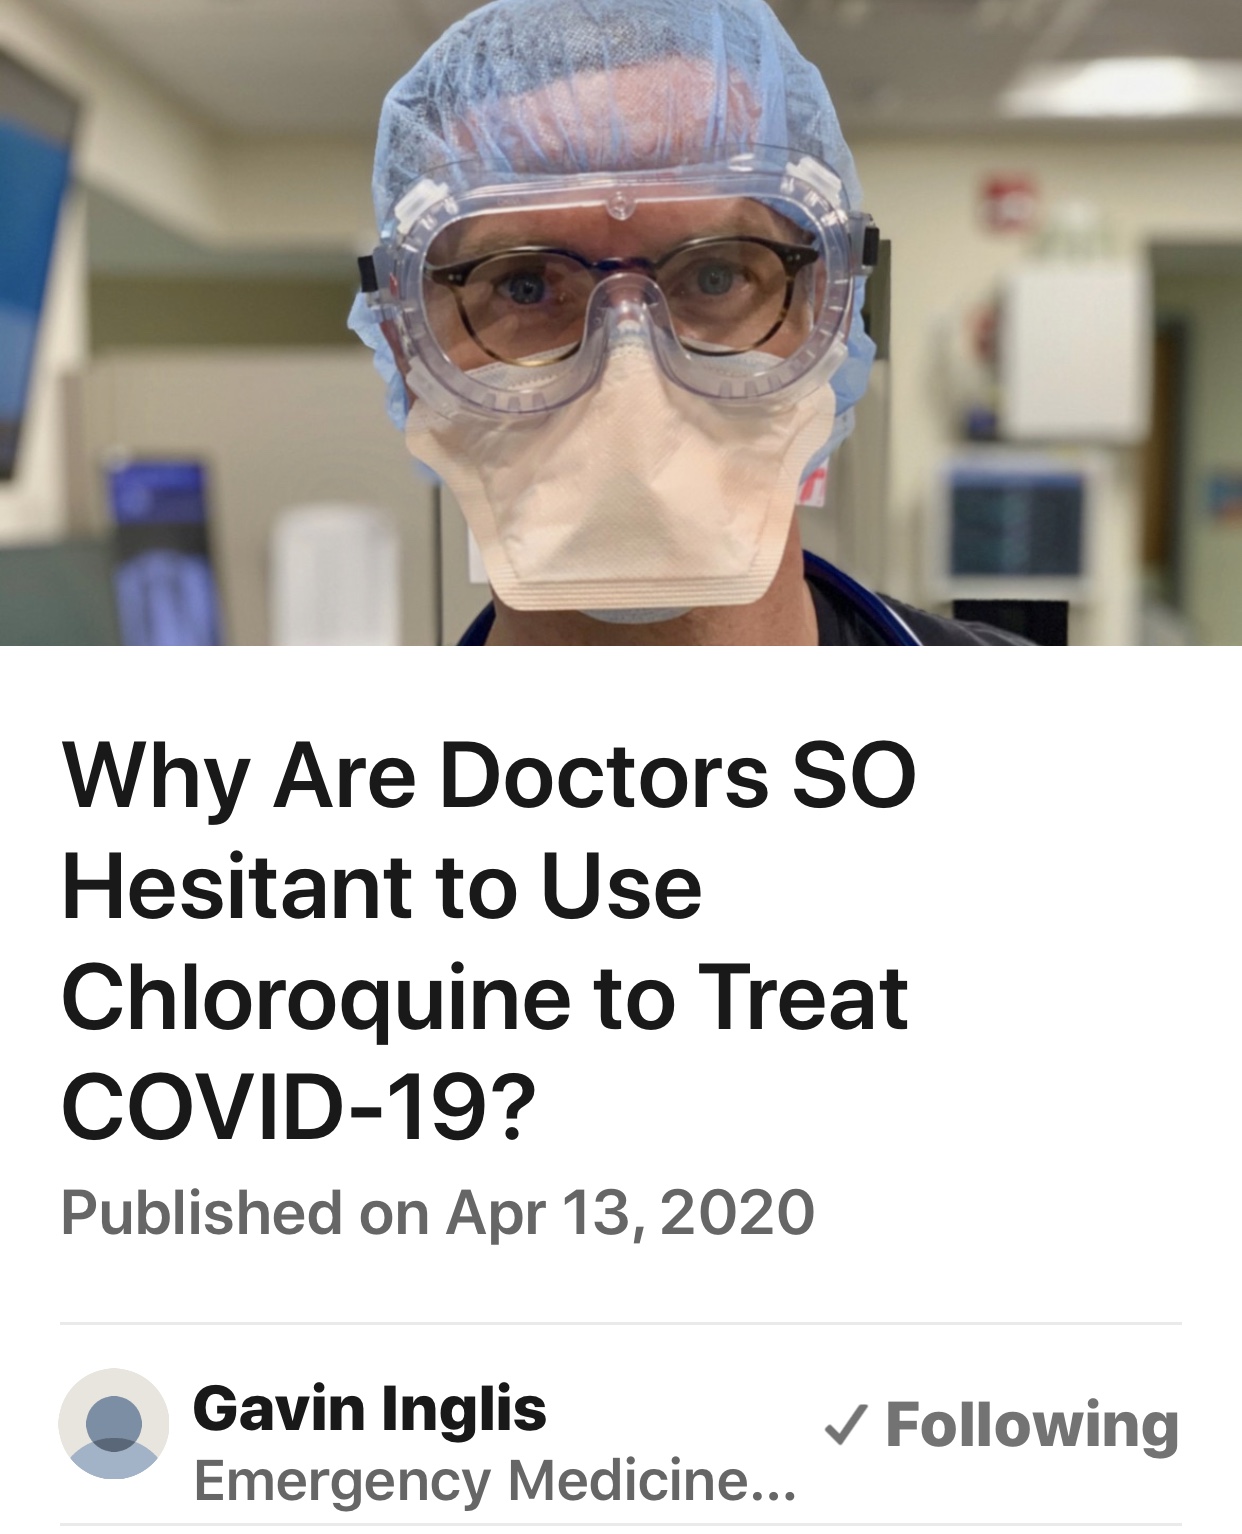 Why are doctors so hesitant to use Hydroxychloroquine to treat COVID-19